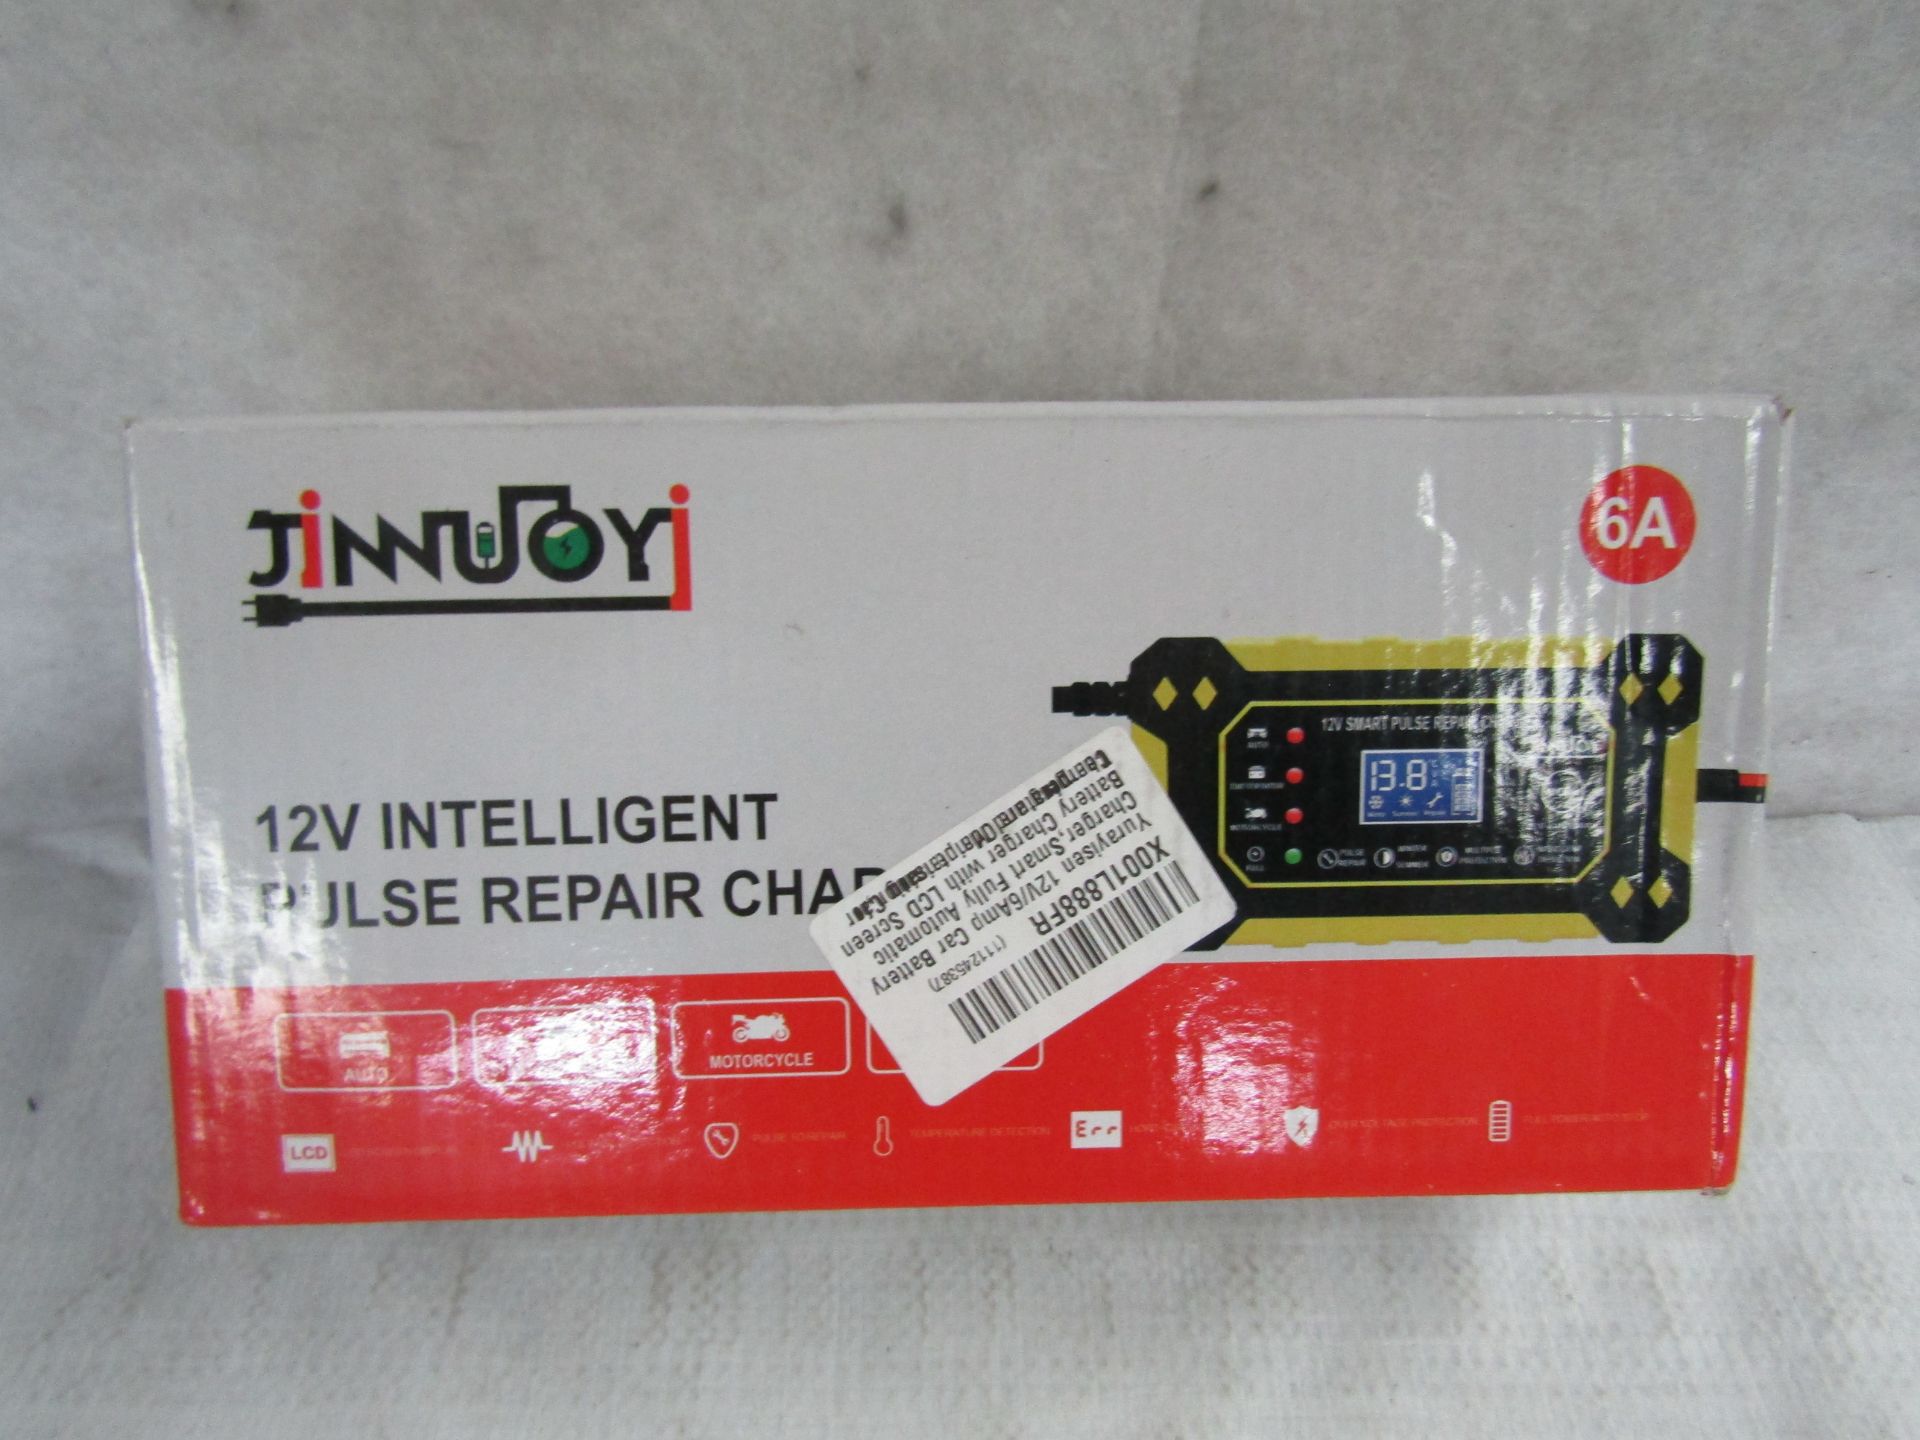 Jinnuoy 12v Intelligent Pulse Repair Charger, Unchecked & Boxed. RRP £15